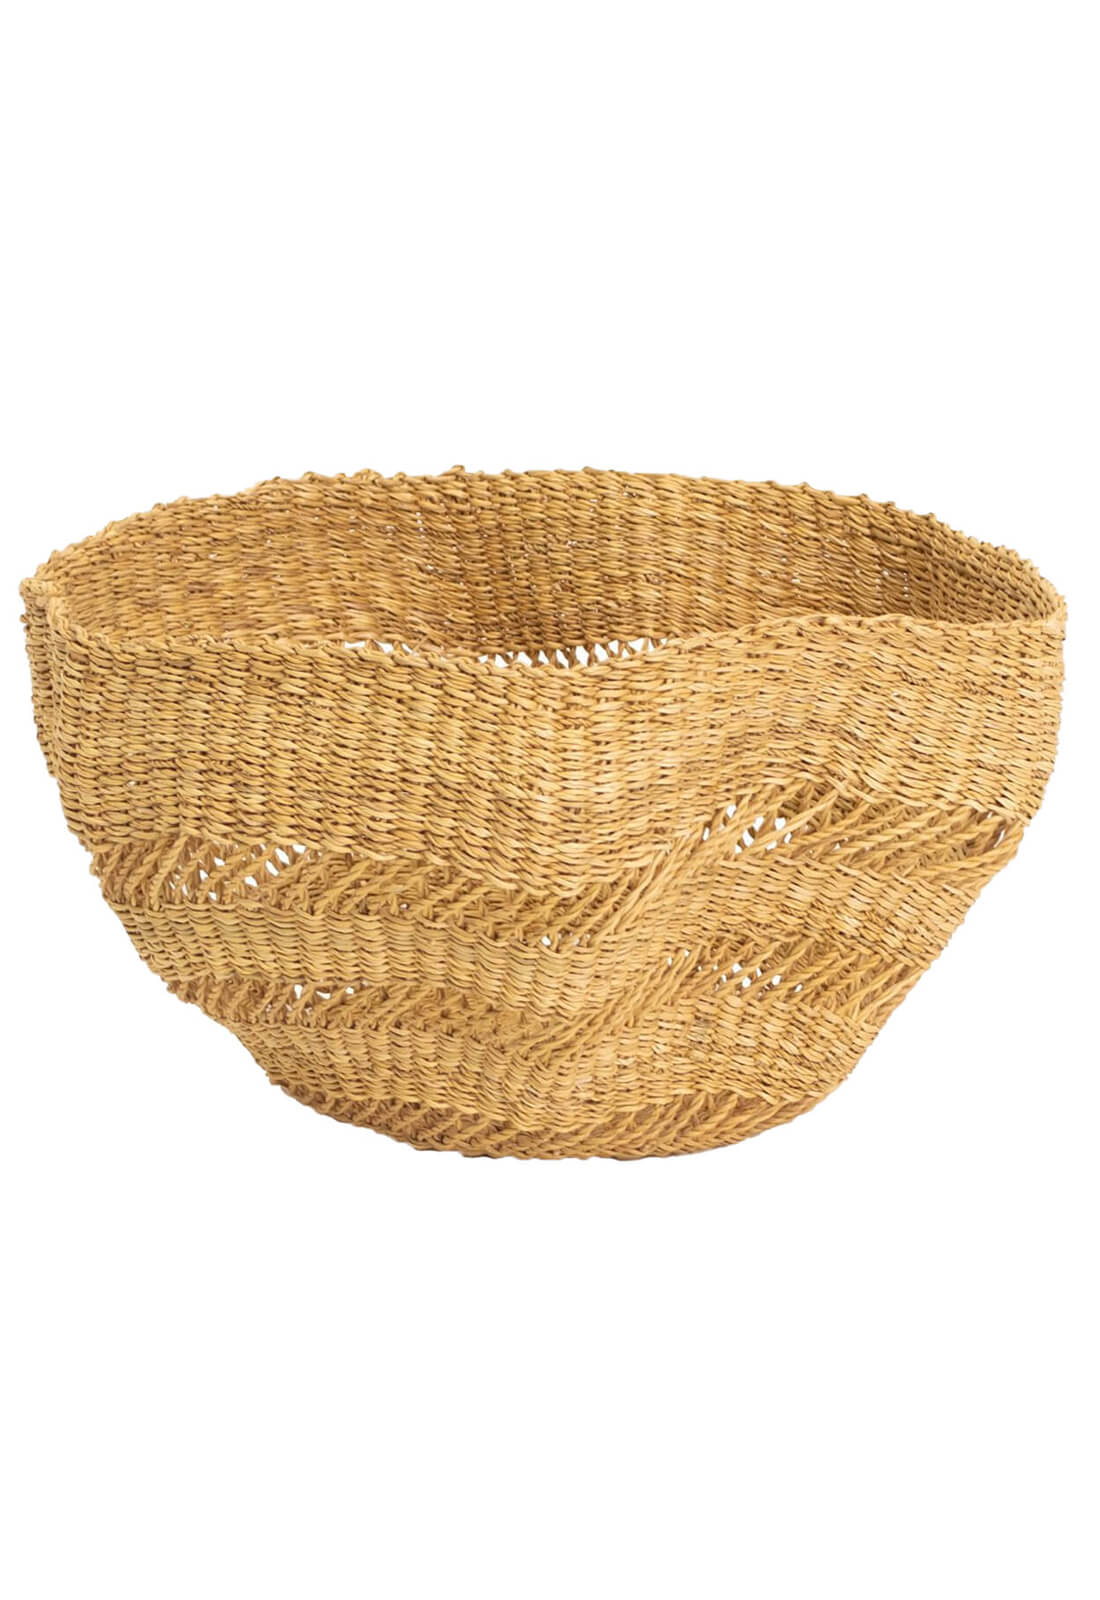 Hand Woven Wavy Lace Grass Bowl